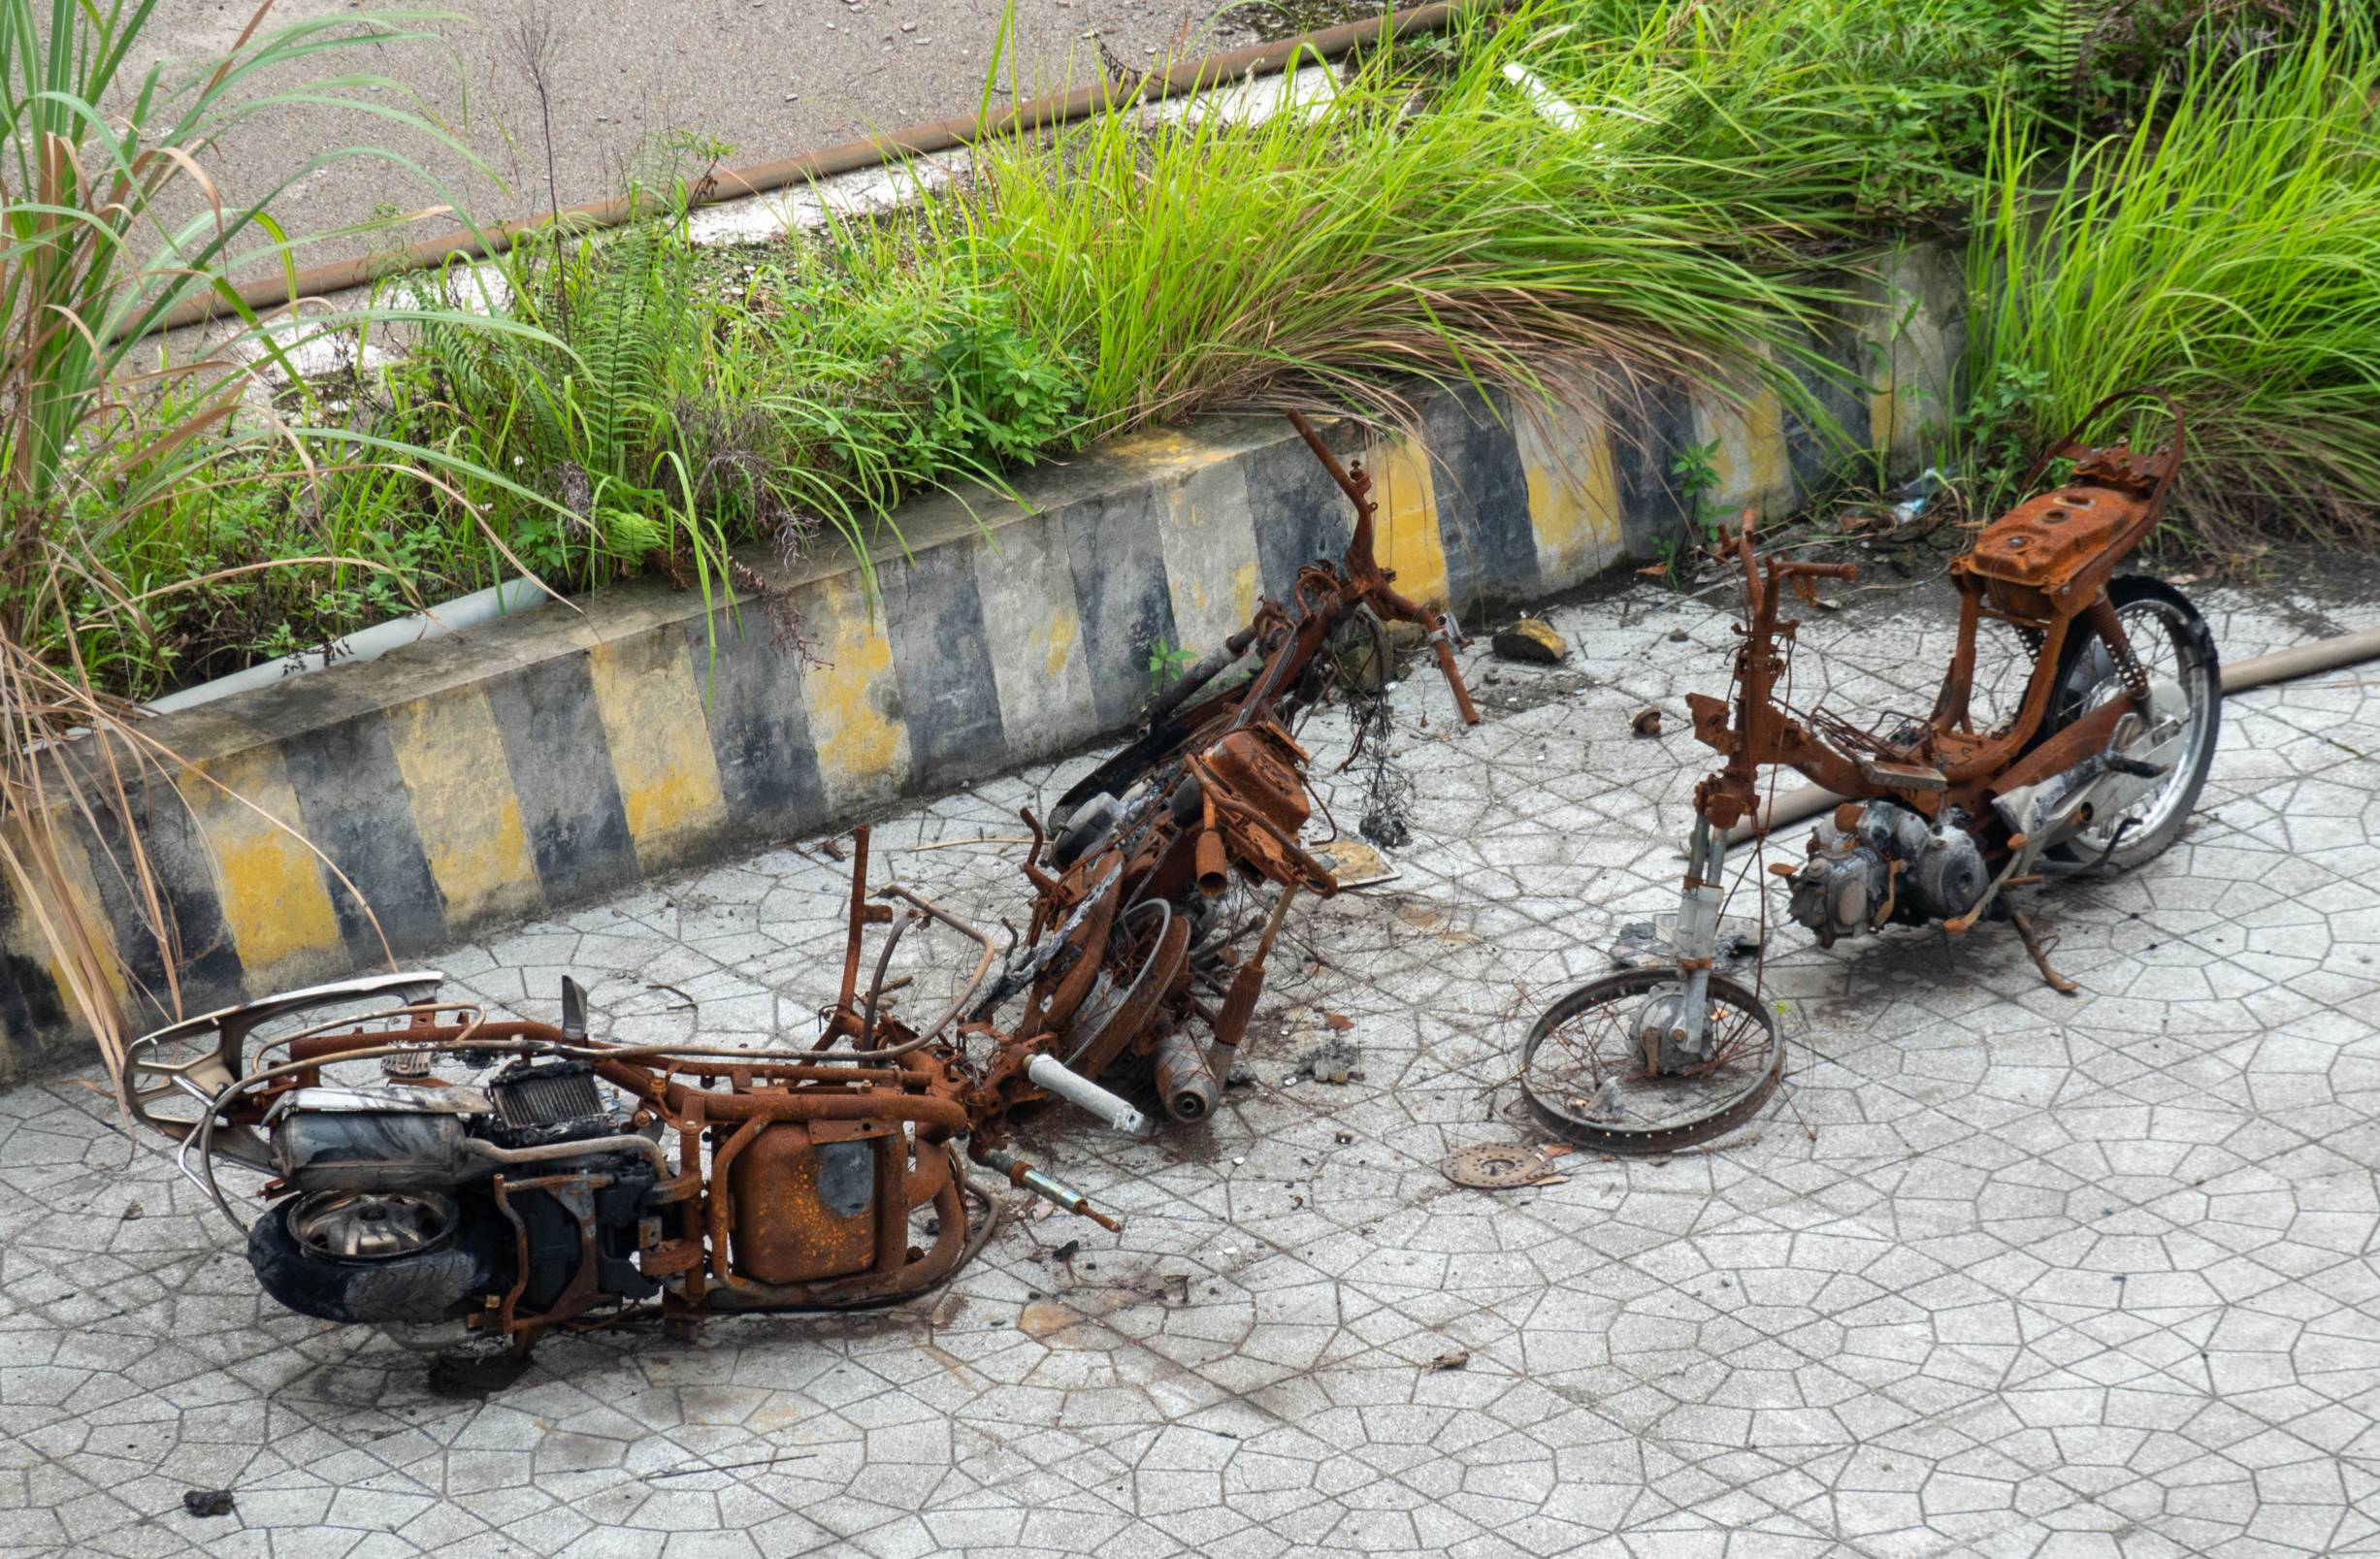 Picture of three rusted motorbikes that look like they might have been set on fire and left to rust